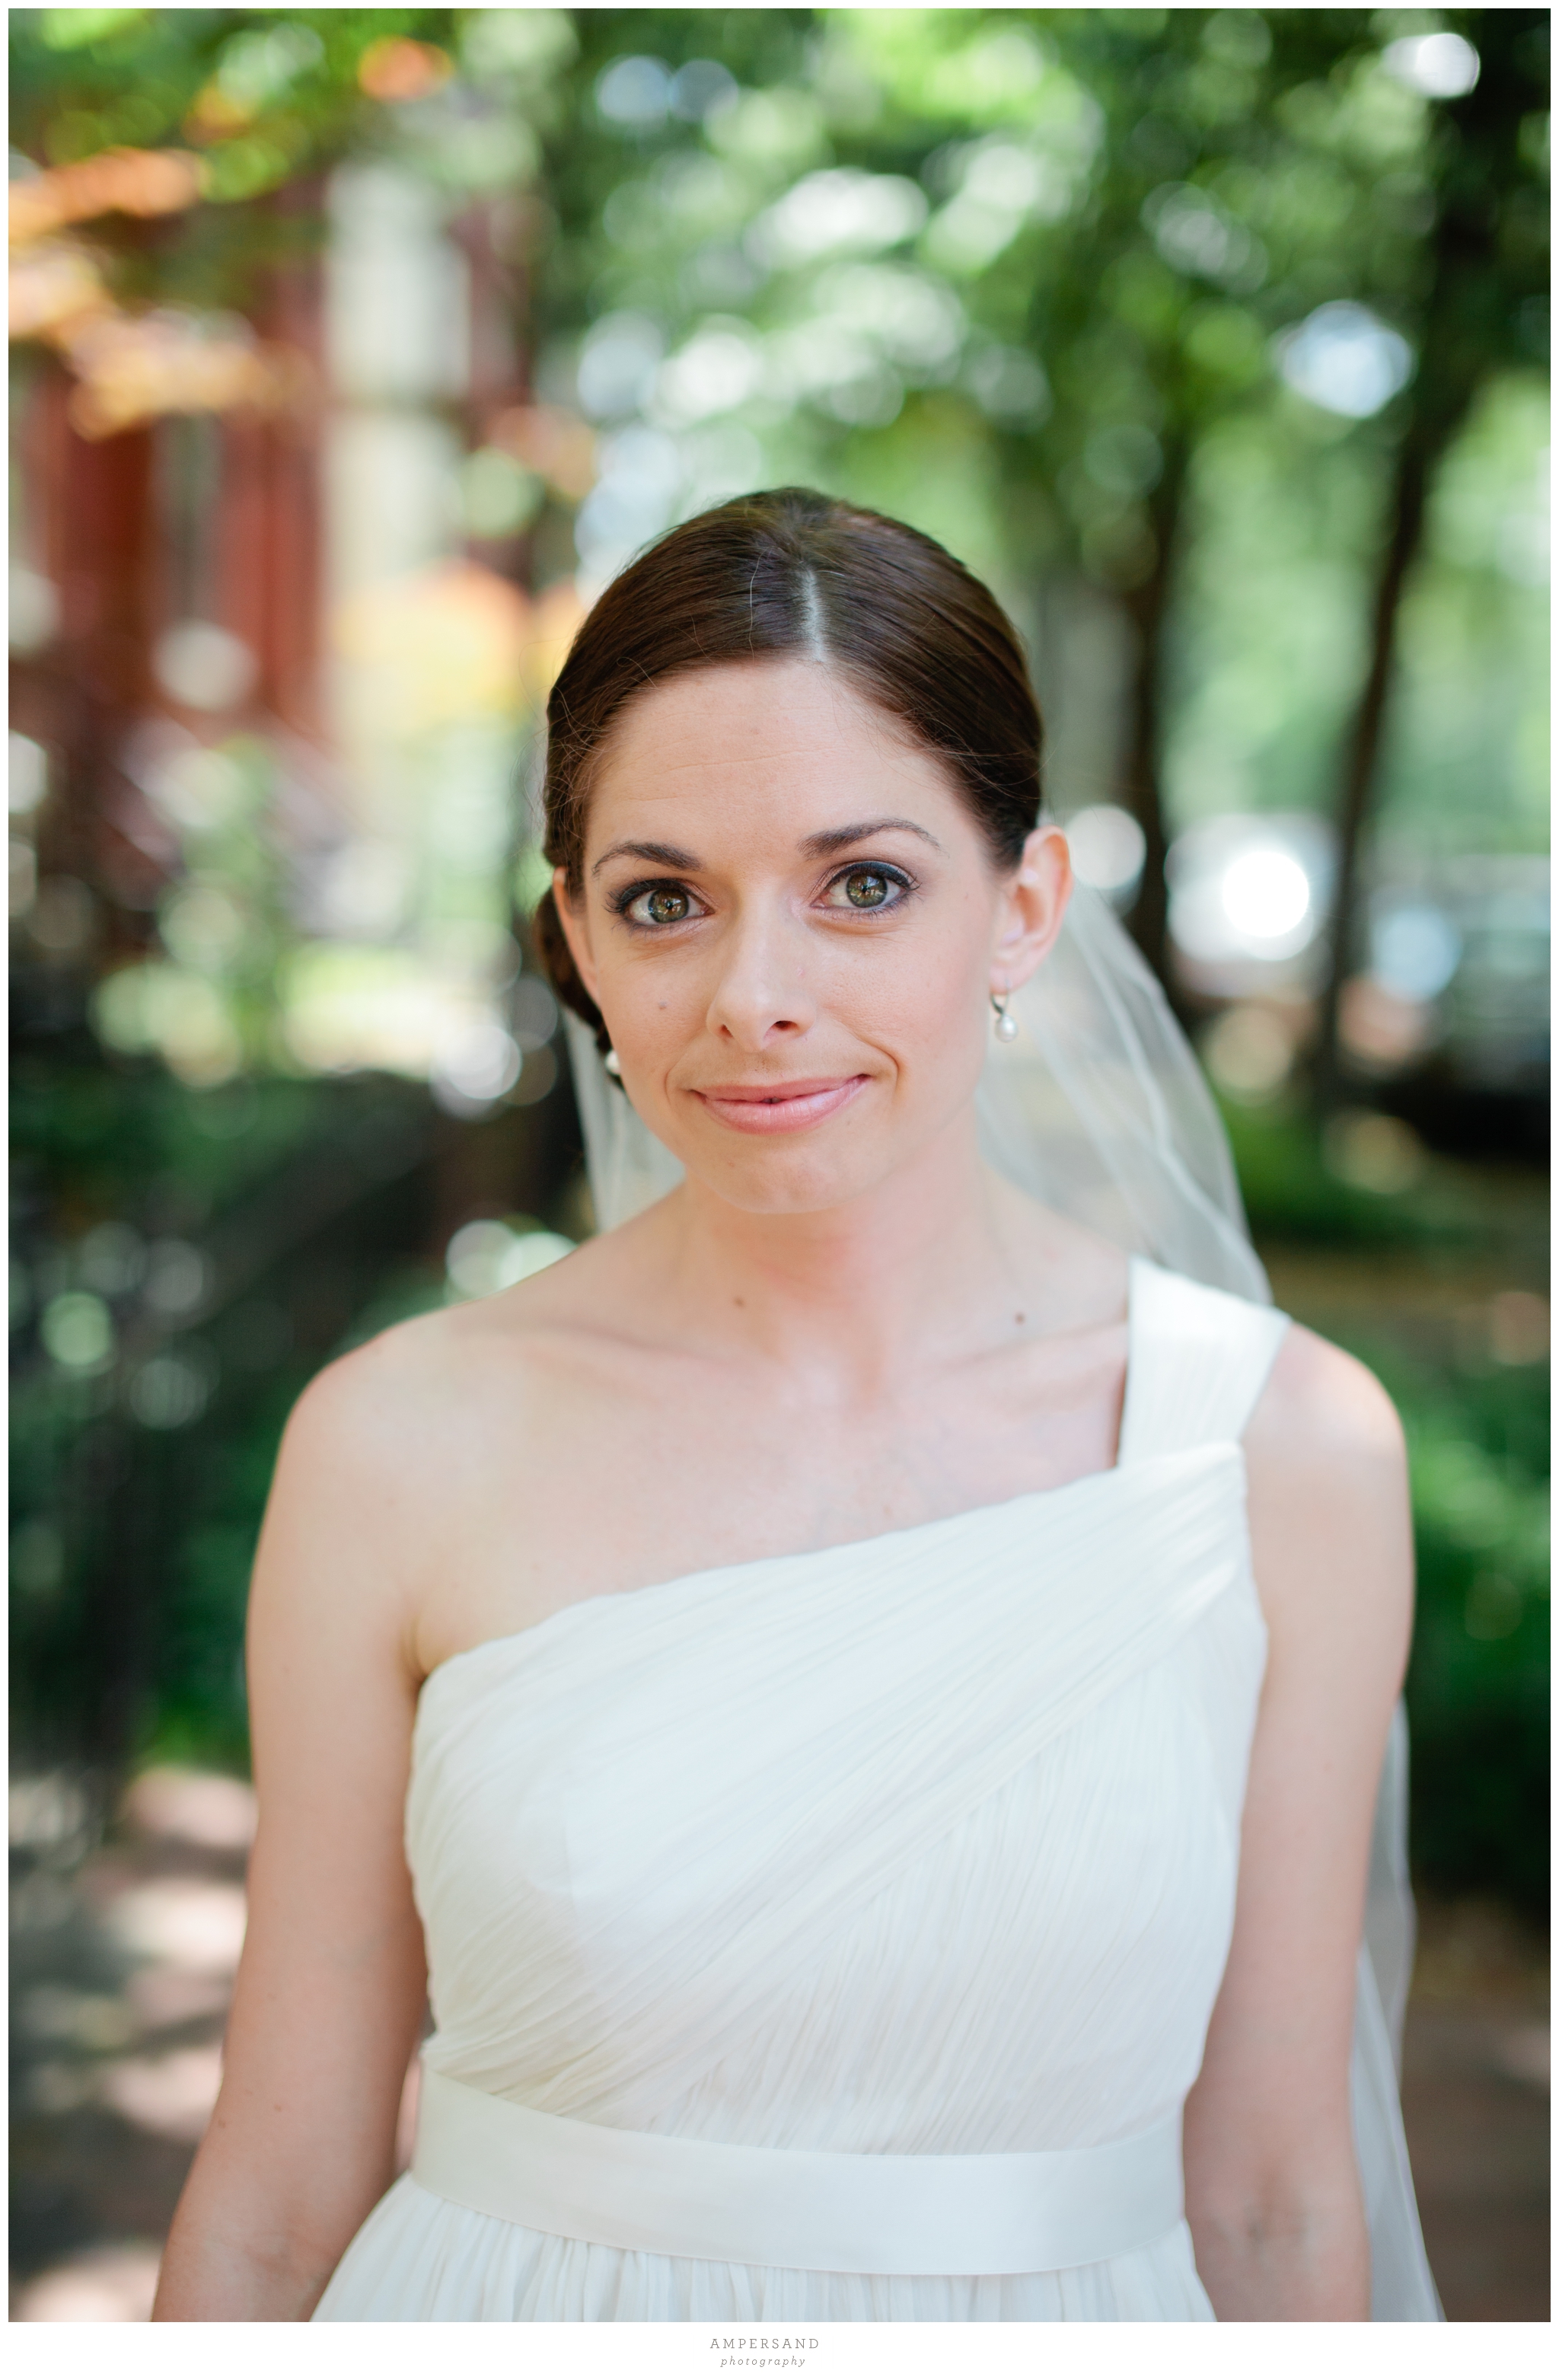 Check out this bride's eyes! // Photos by Ampersand Photography